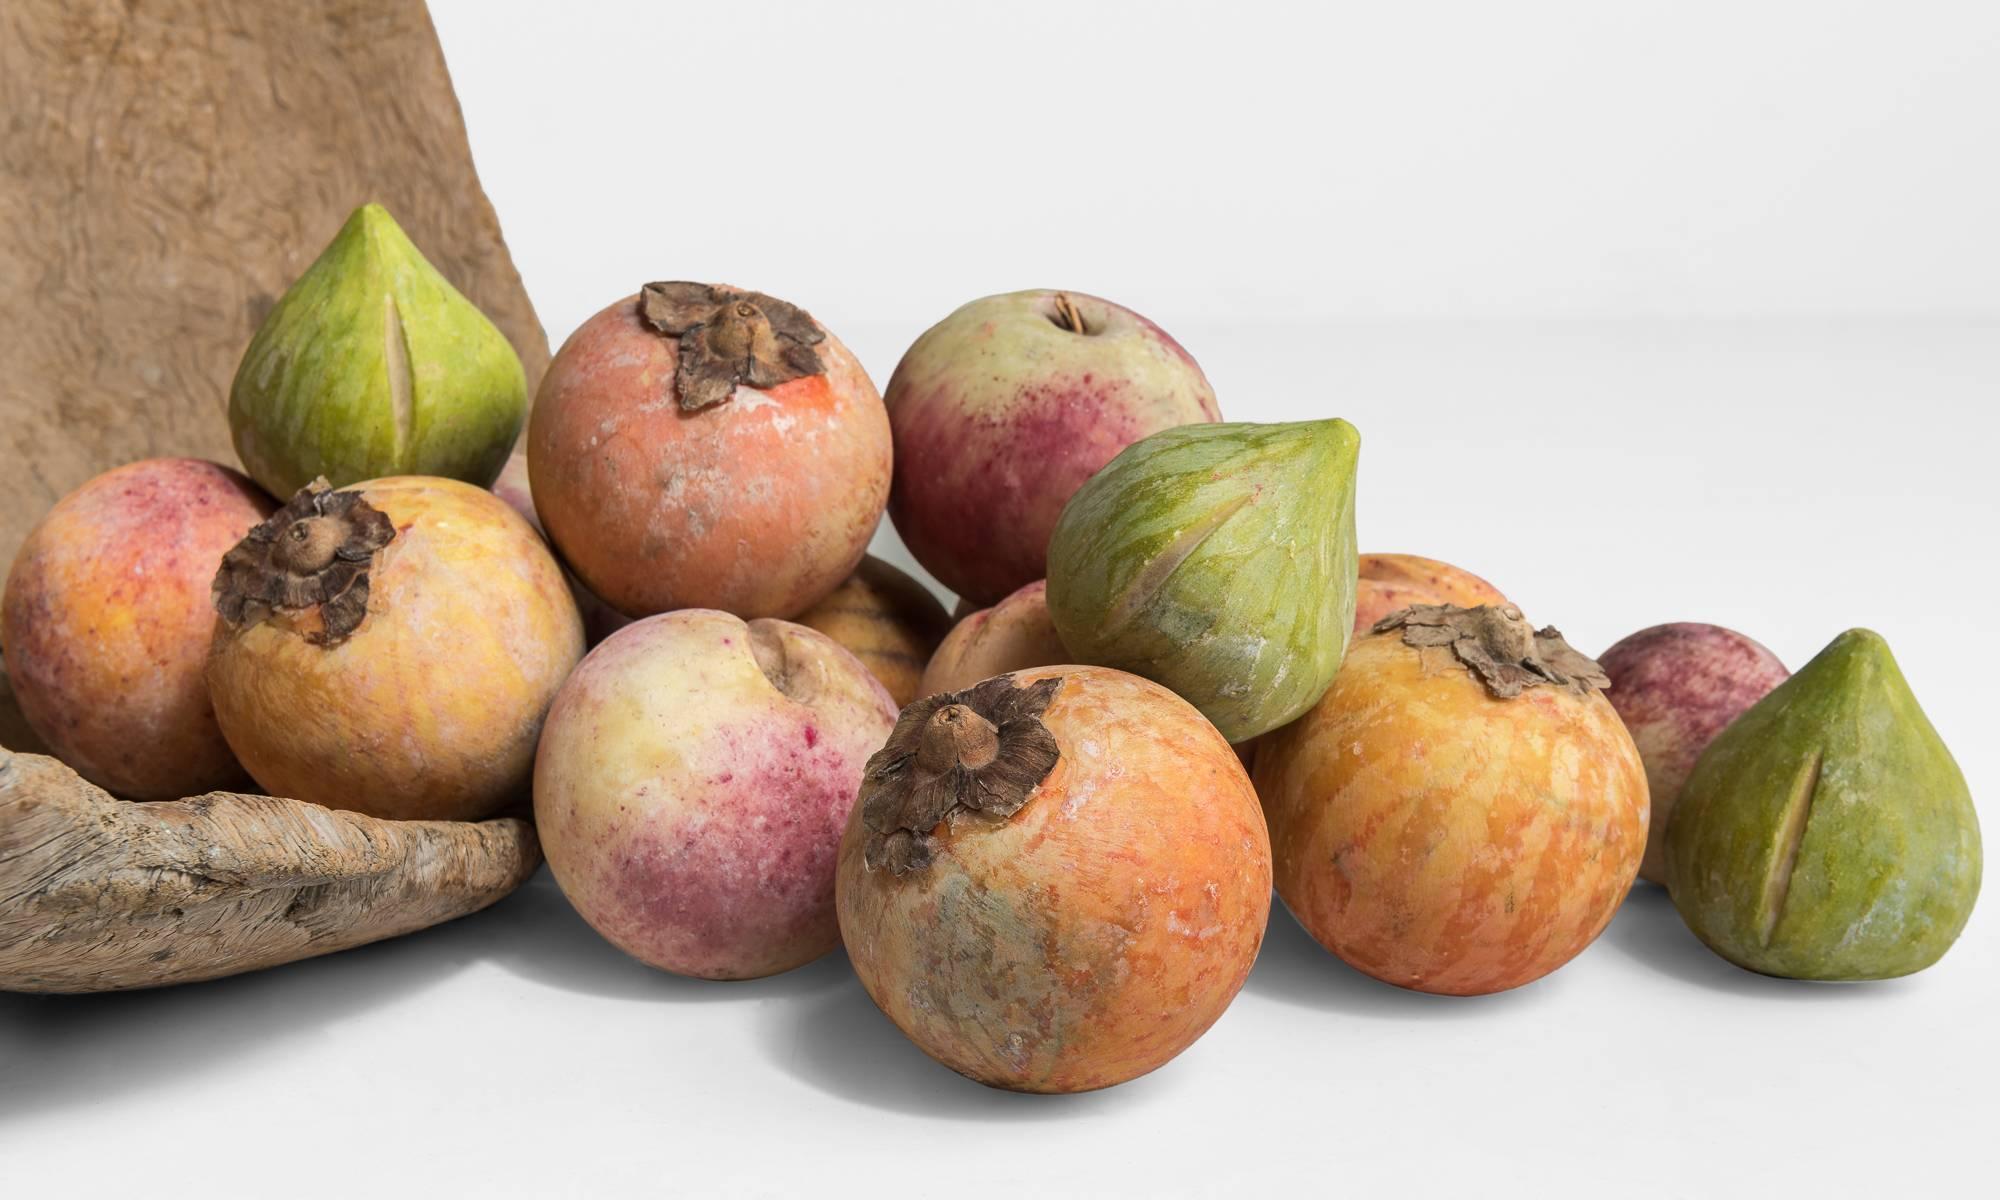 Collection of marble fruit, circa 1960.

Assortment of hand-carved and hand-painted collection of marble fruit, persimmons, apples, peaches and figs.